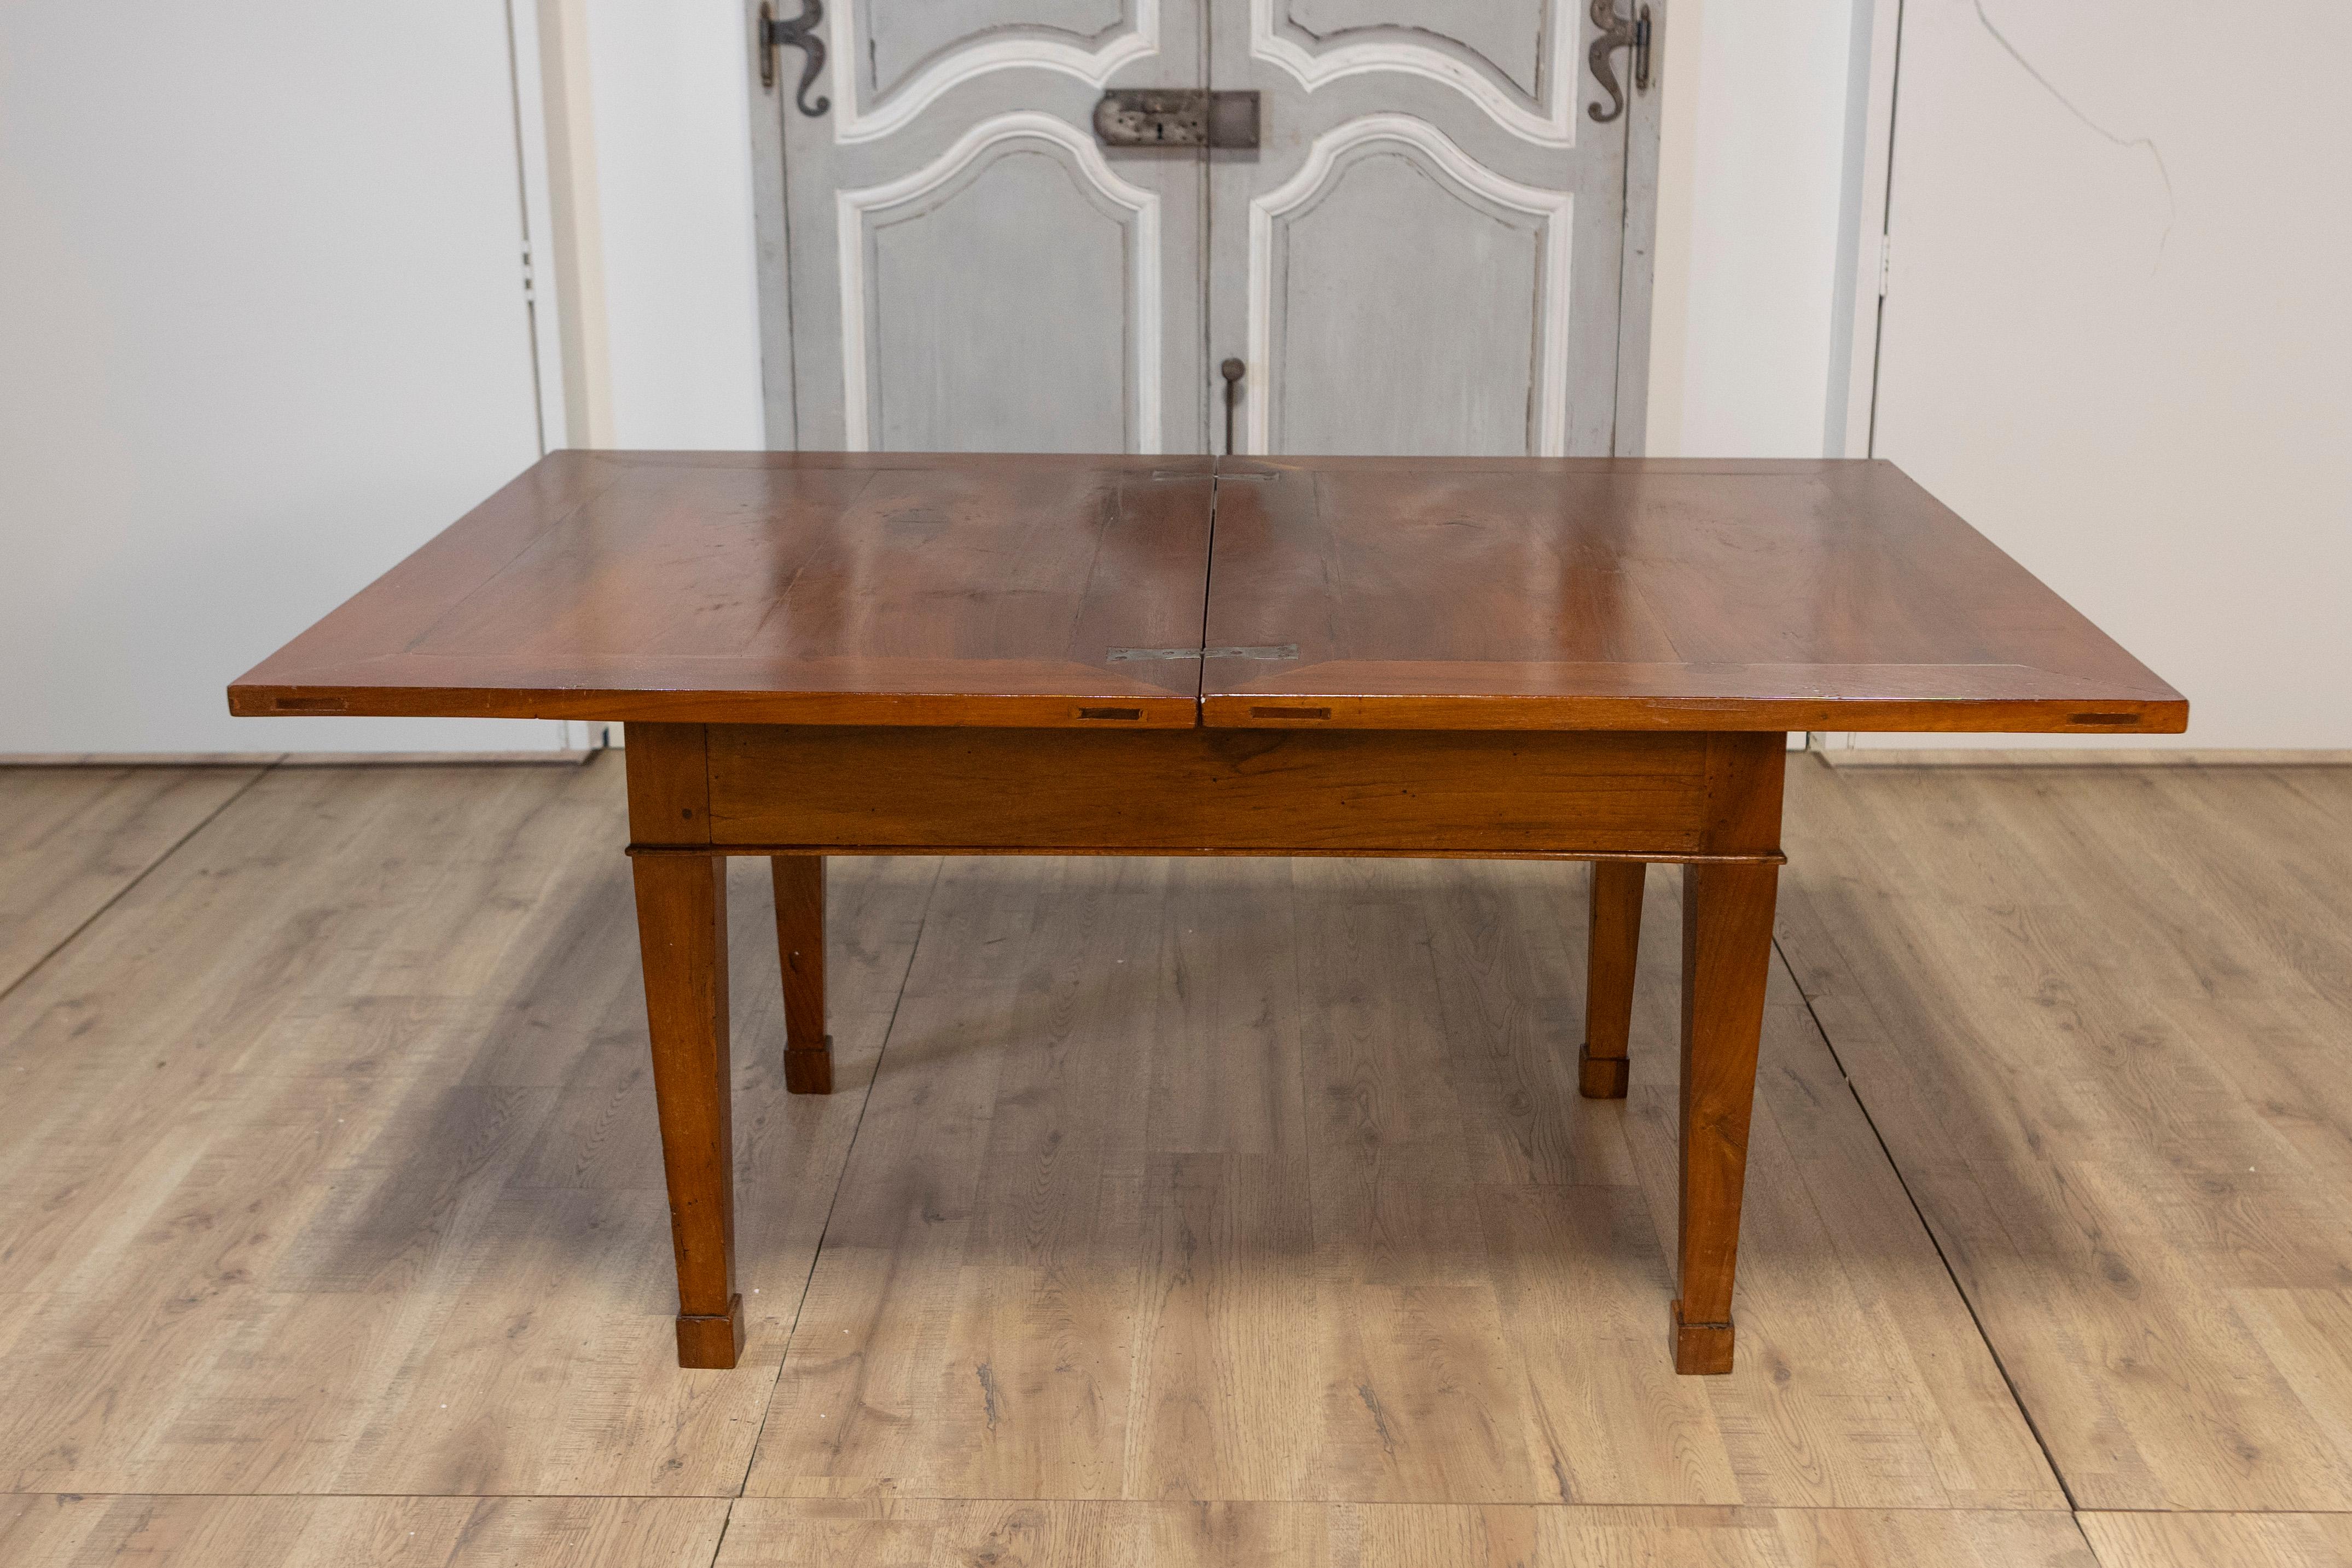 This exquisite Italian walnut folding table from the early 19th century embodies classic elegance with practical functionality. Featuring a versatile design, the table measures 65.5